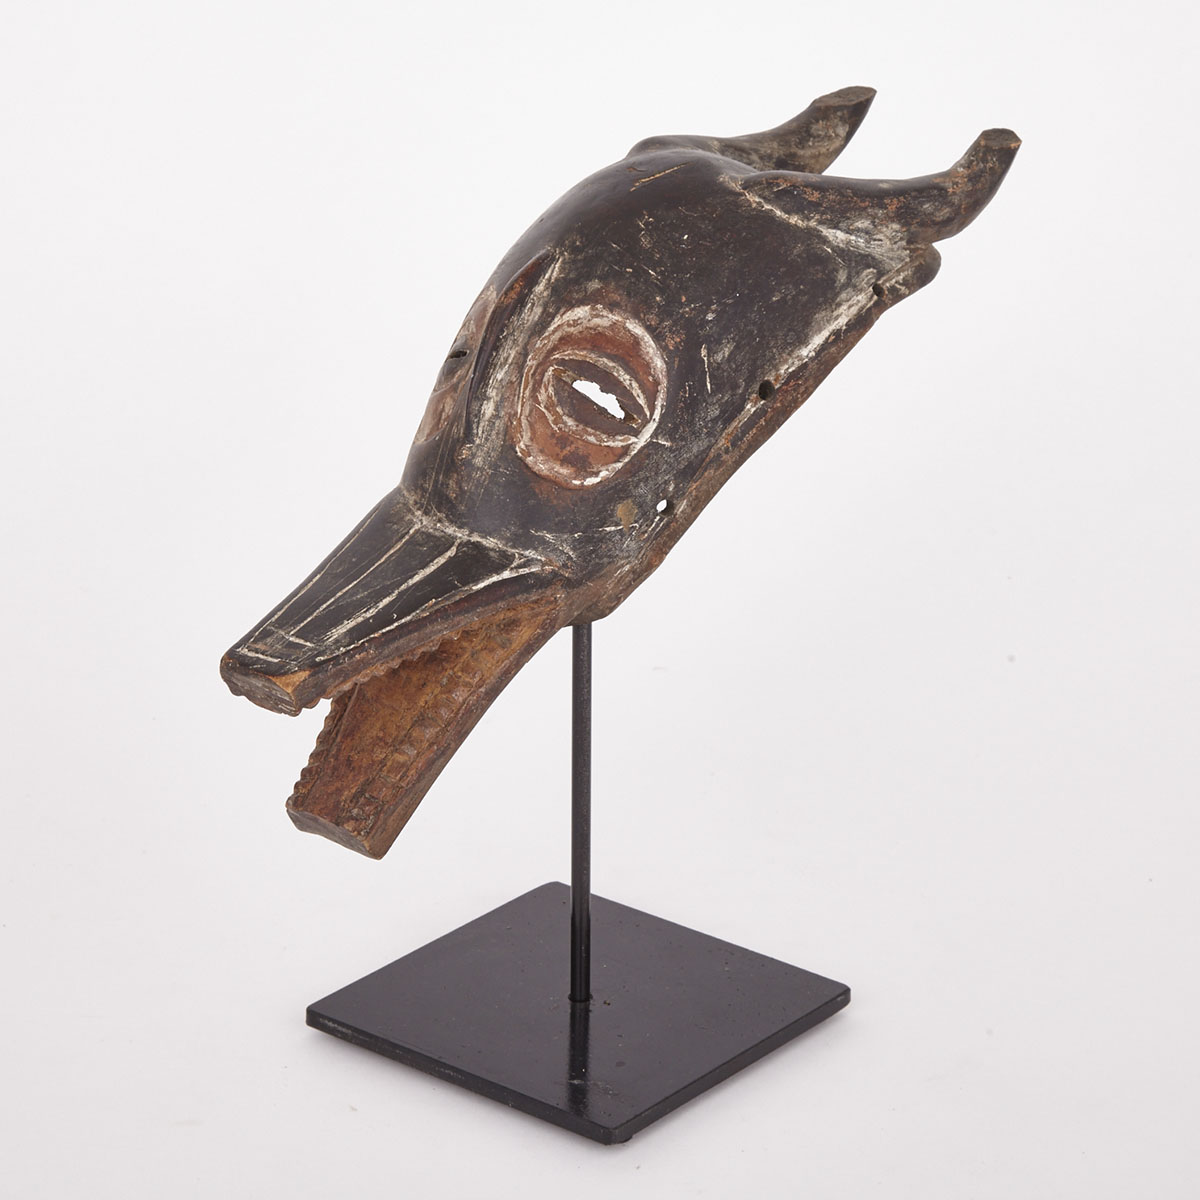 Guro Zamble Zoomorphic Carved and Painted Wood Mask, West Africa, 20th century